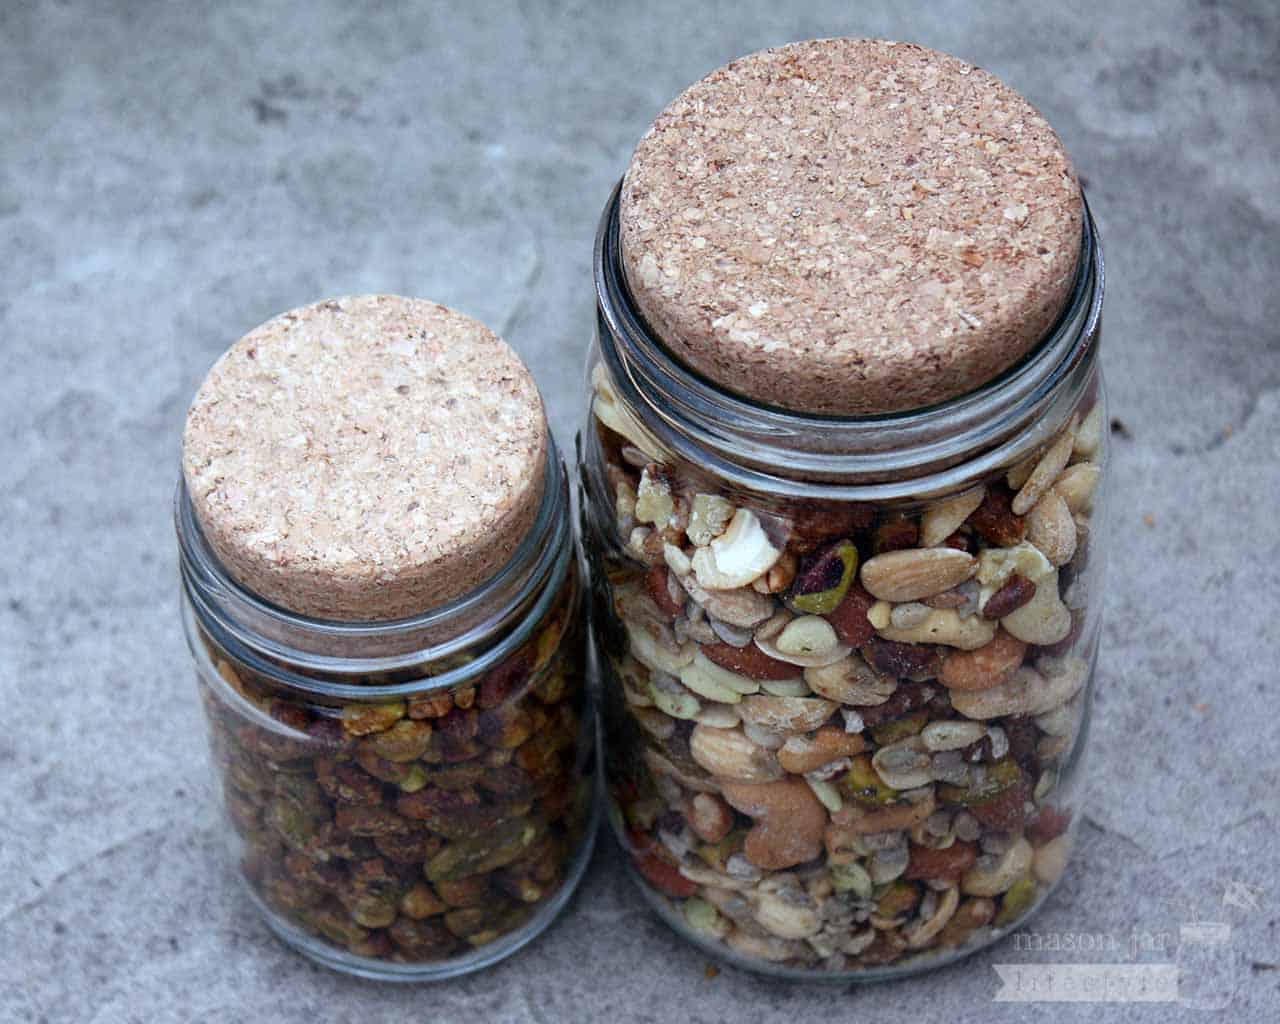 Cork lids stoppers on regular and wide mouth Mason jars with nuts